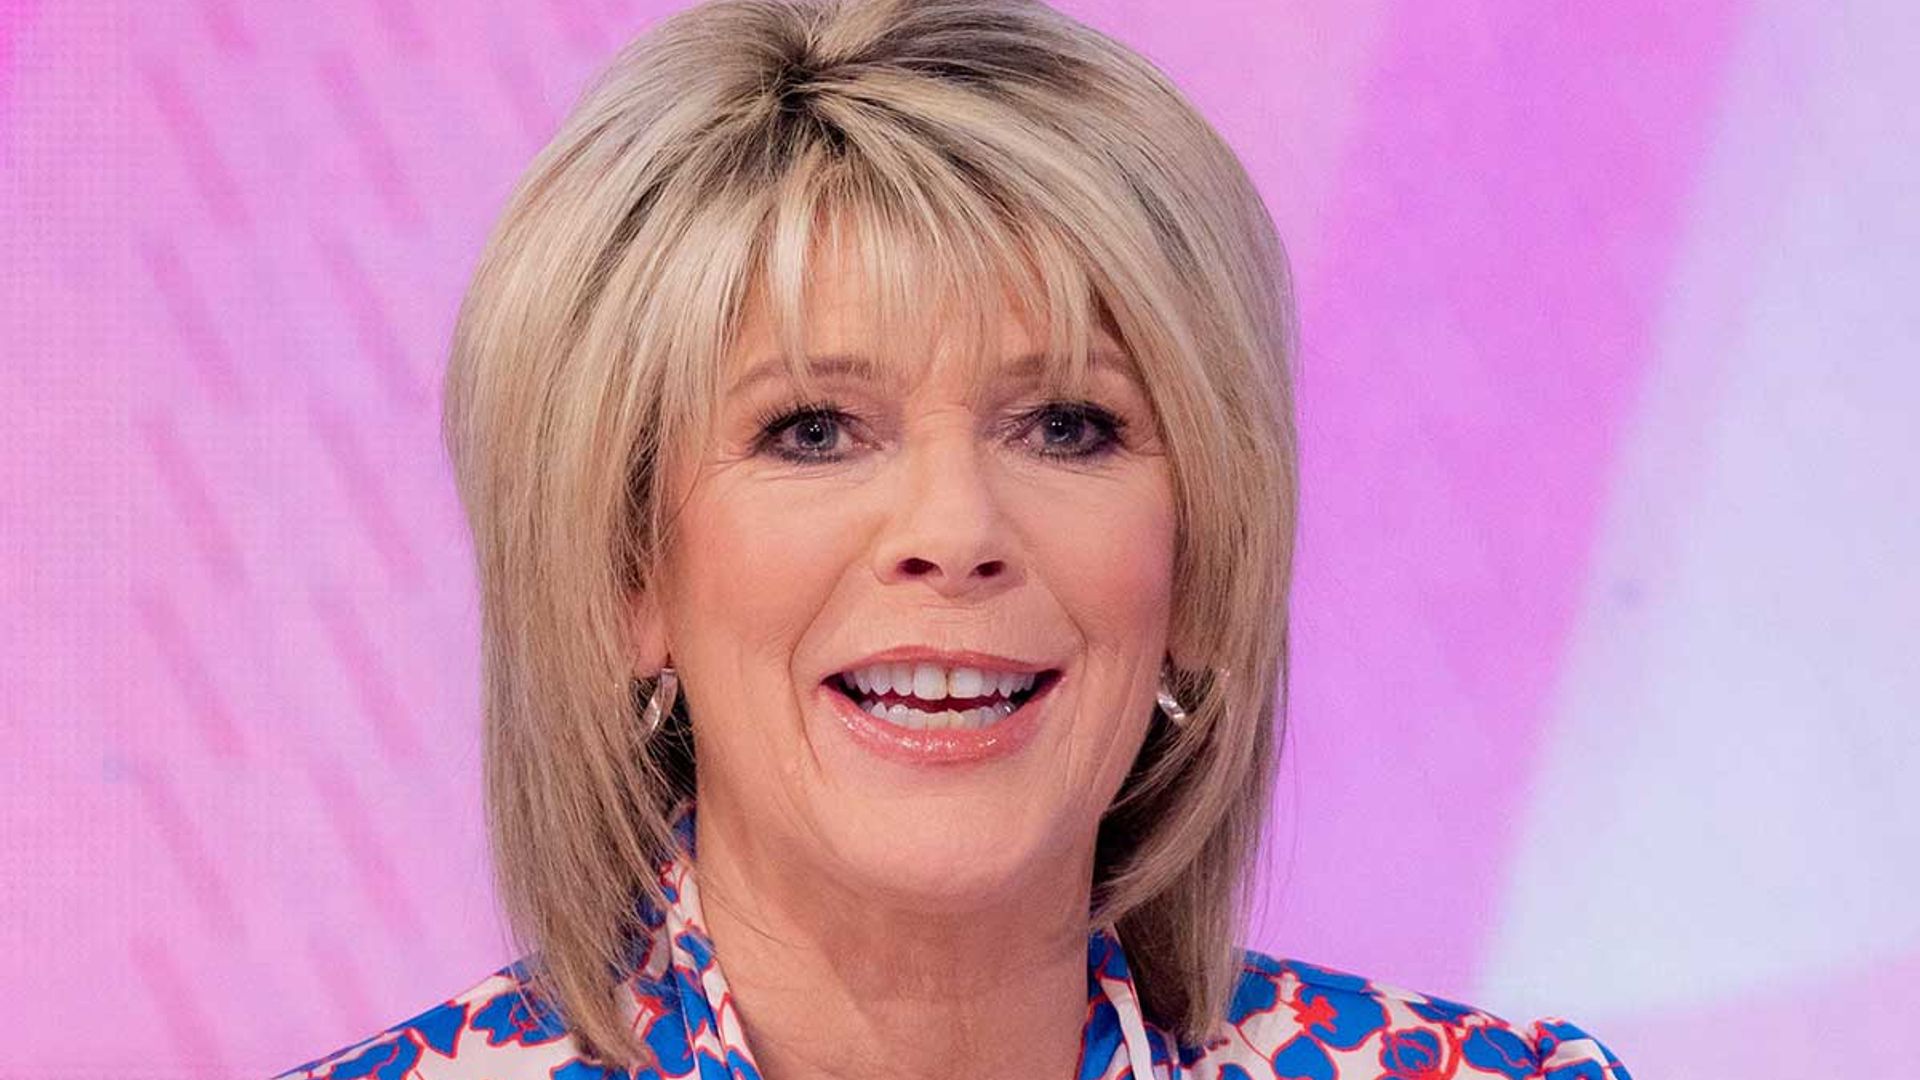 Ruth Langsford makes radiant appearance in striking floral blouse